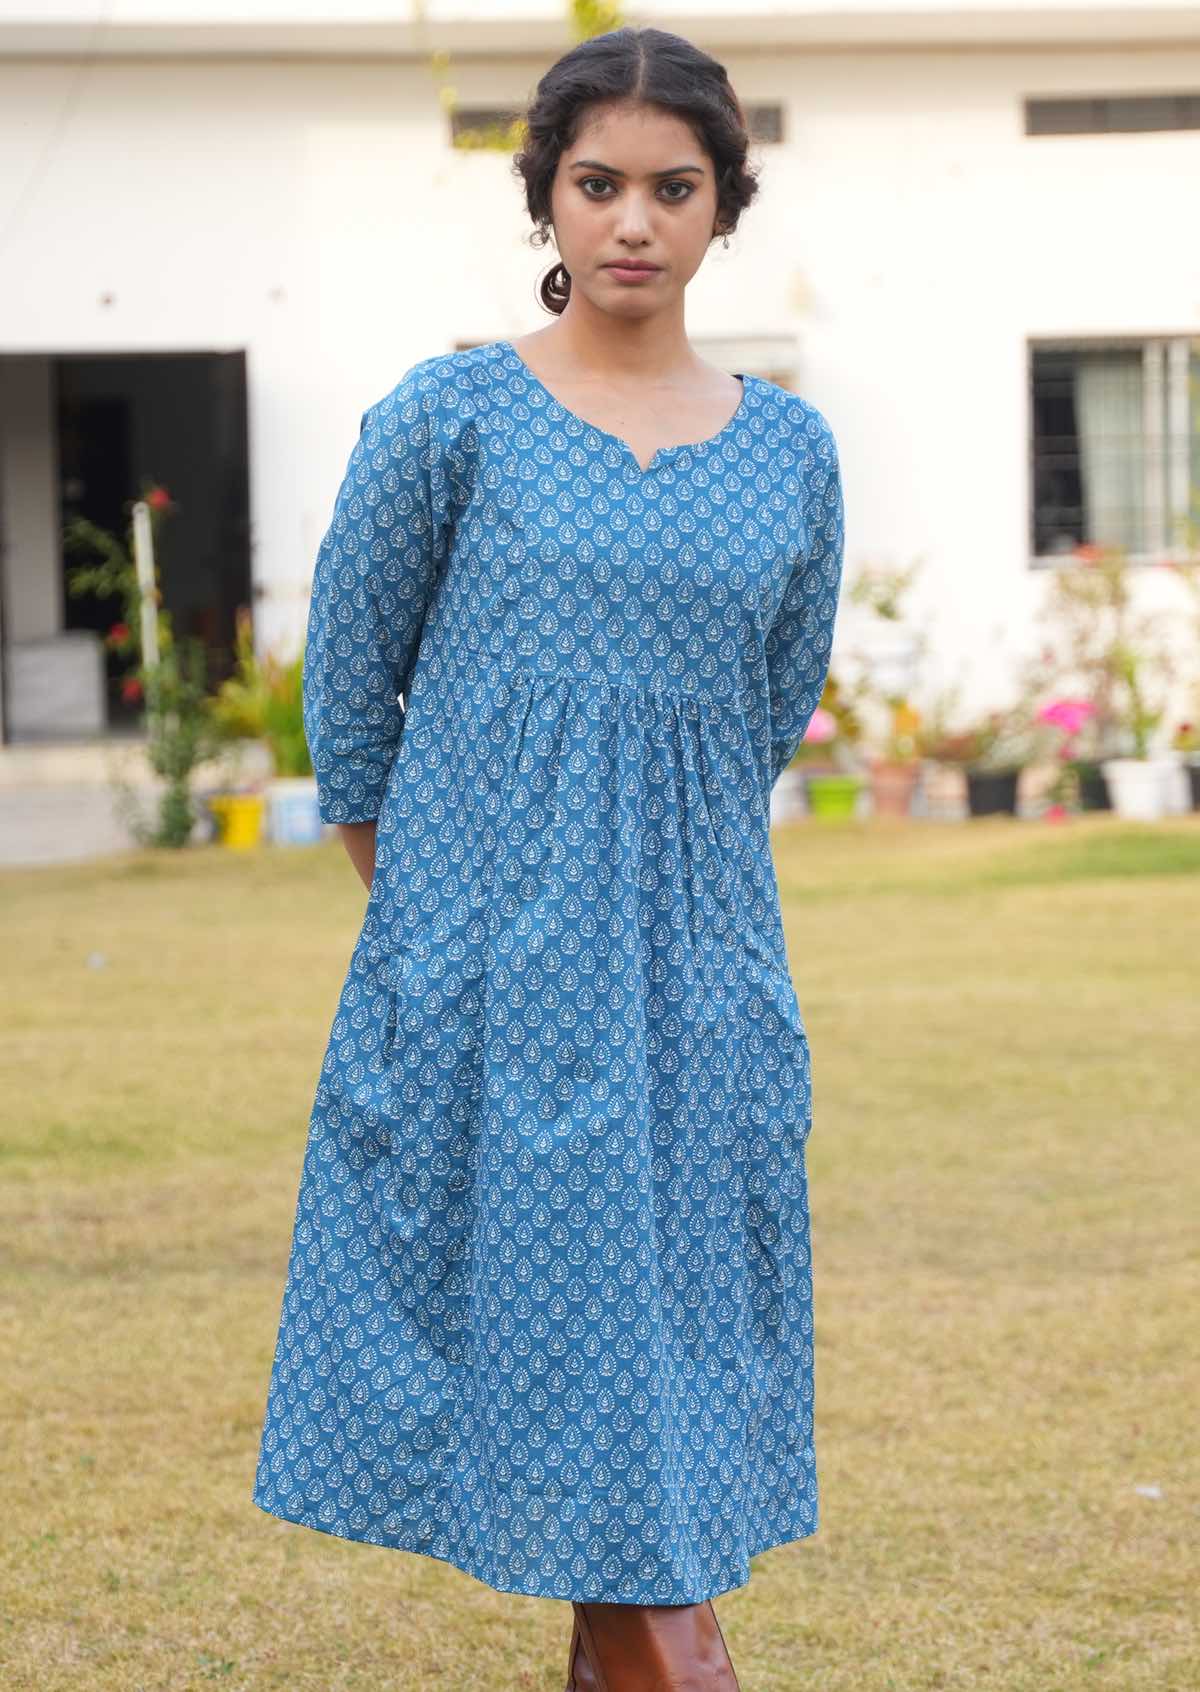 Cotton dress with round neckline with keyhole cutout